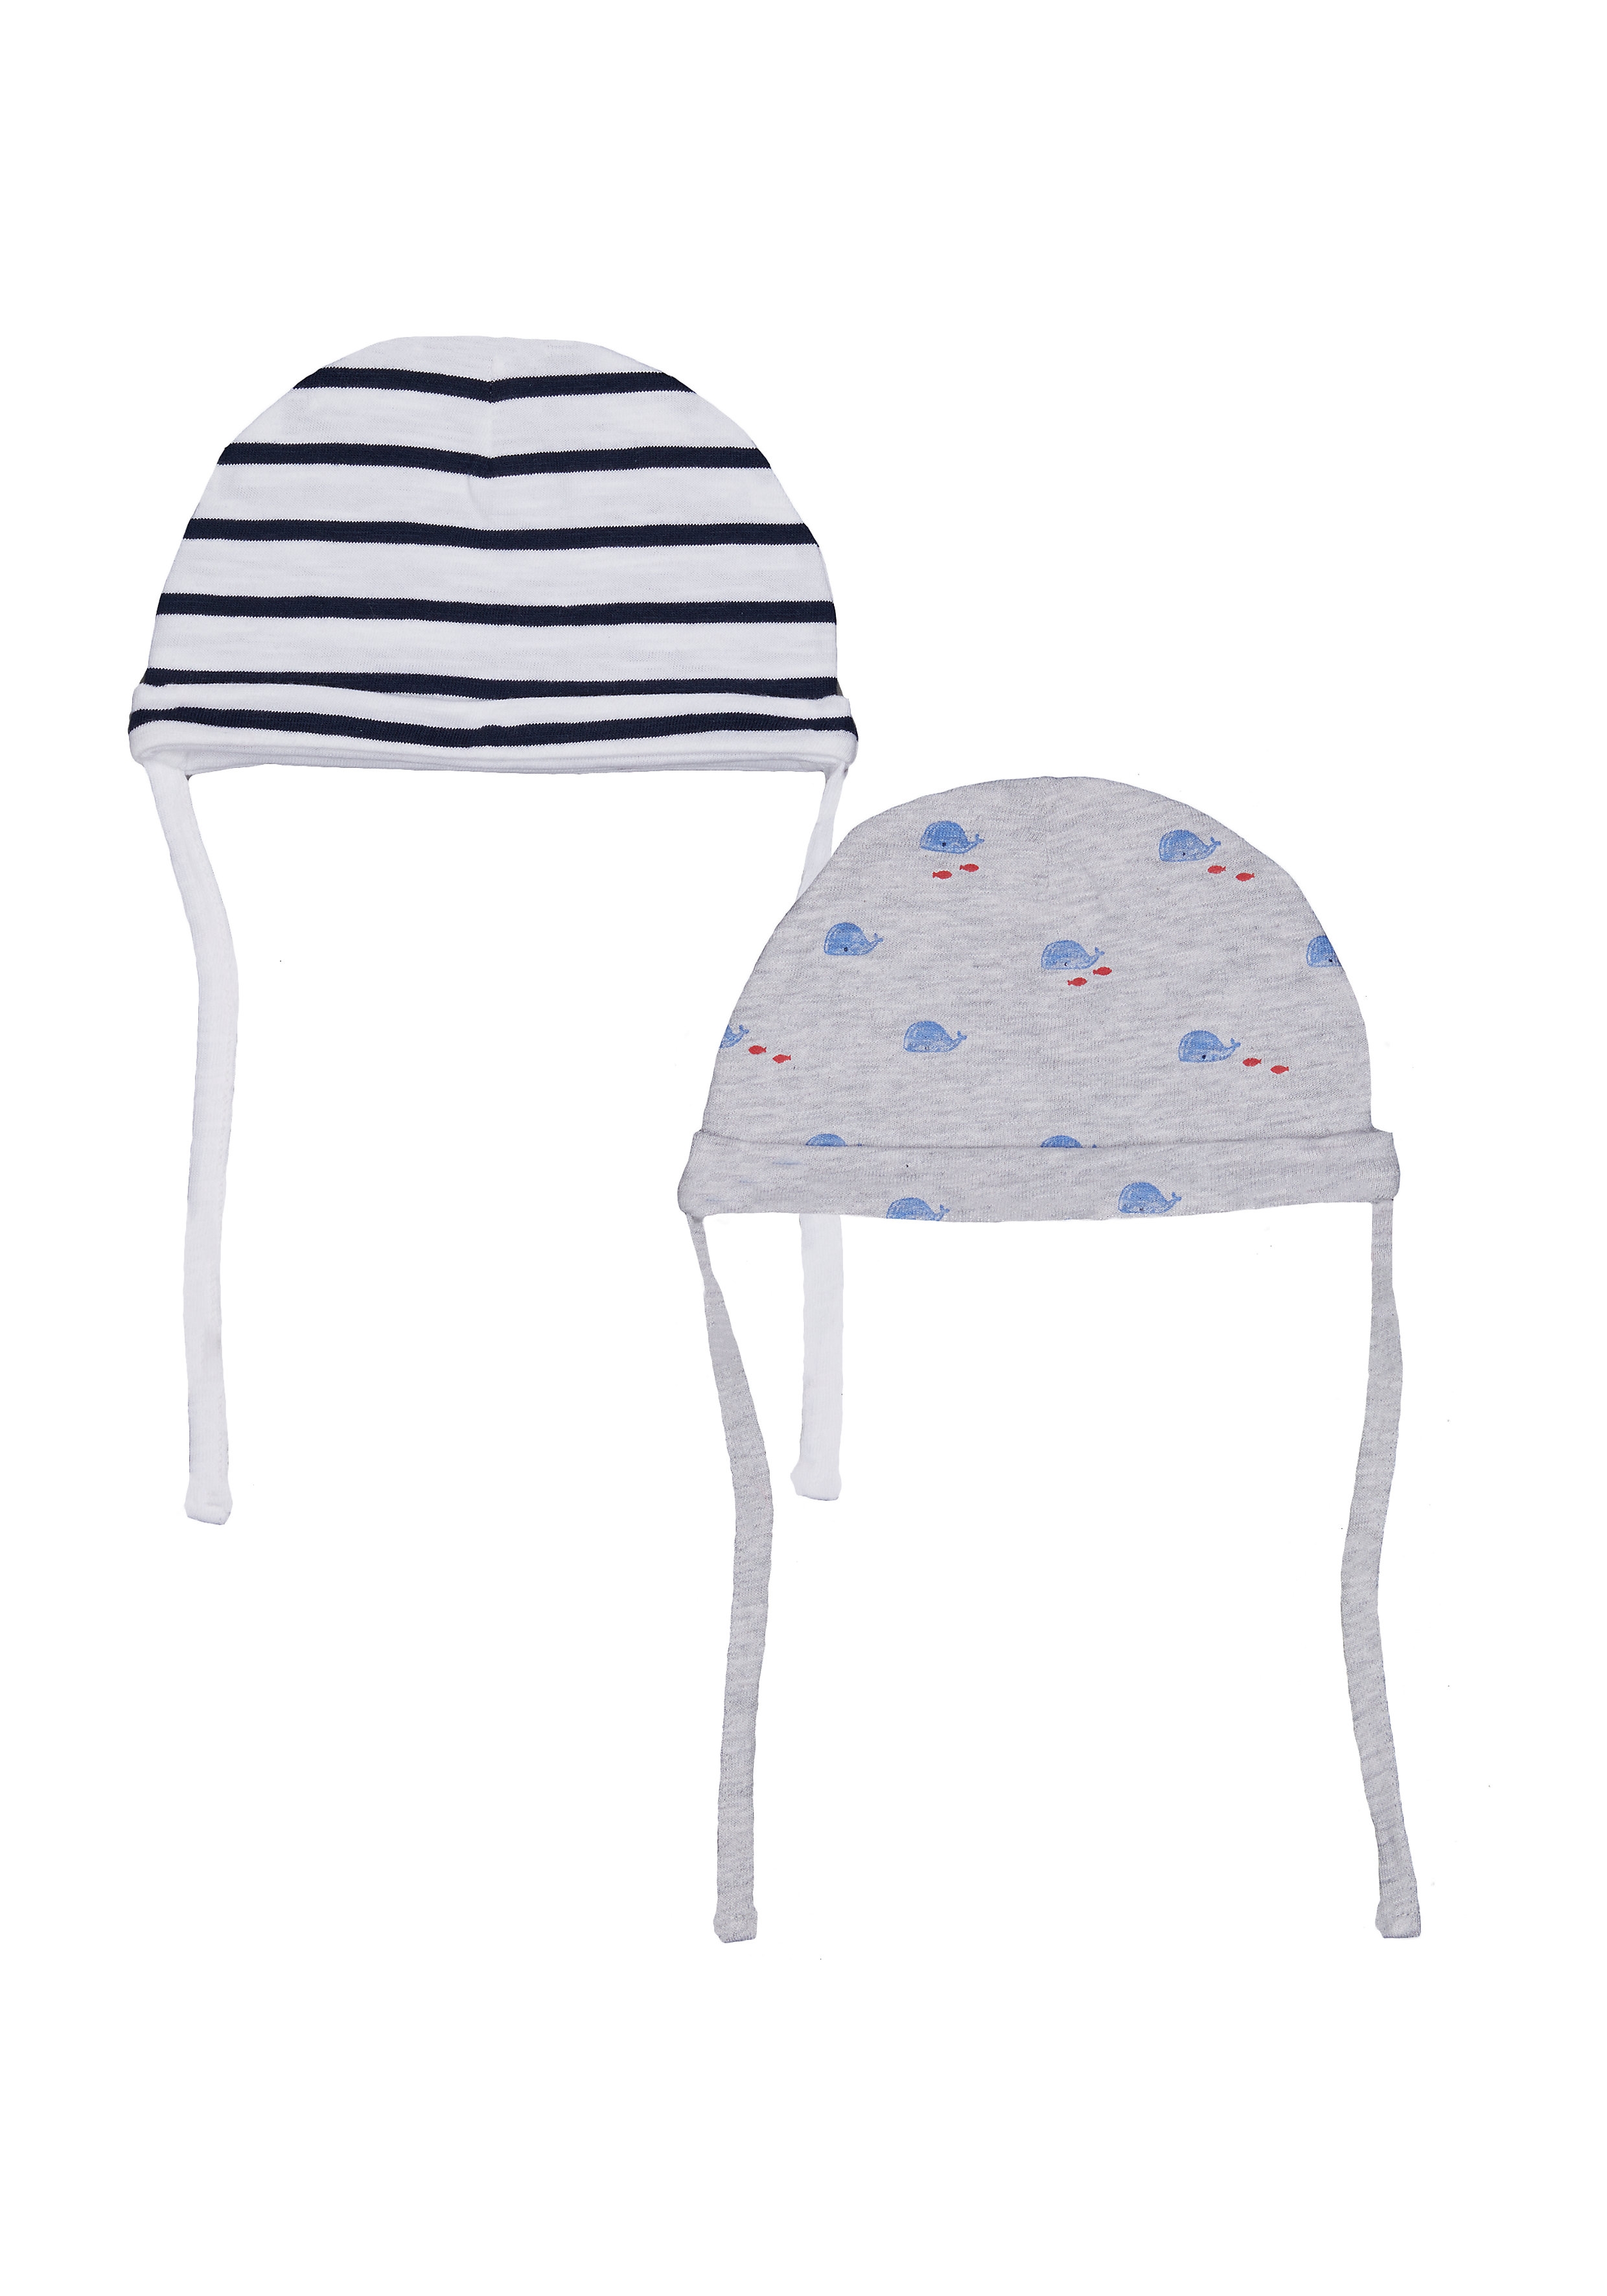 Mothercare | Boys Stripe And Whale Hats – 2 Pack - Grey 0